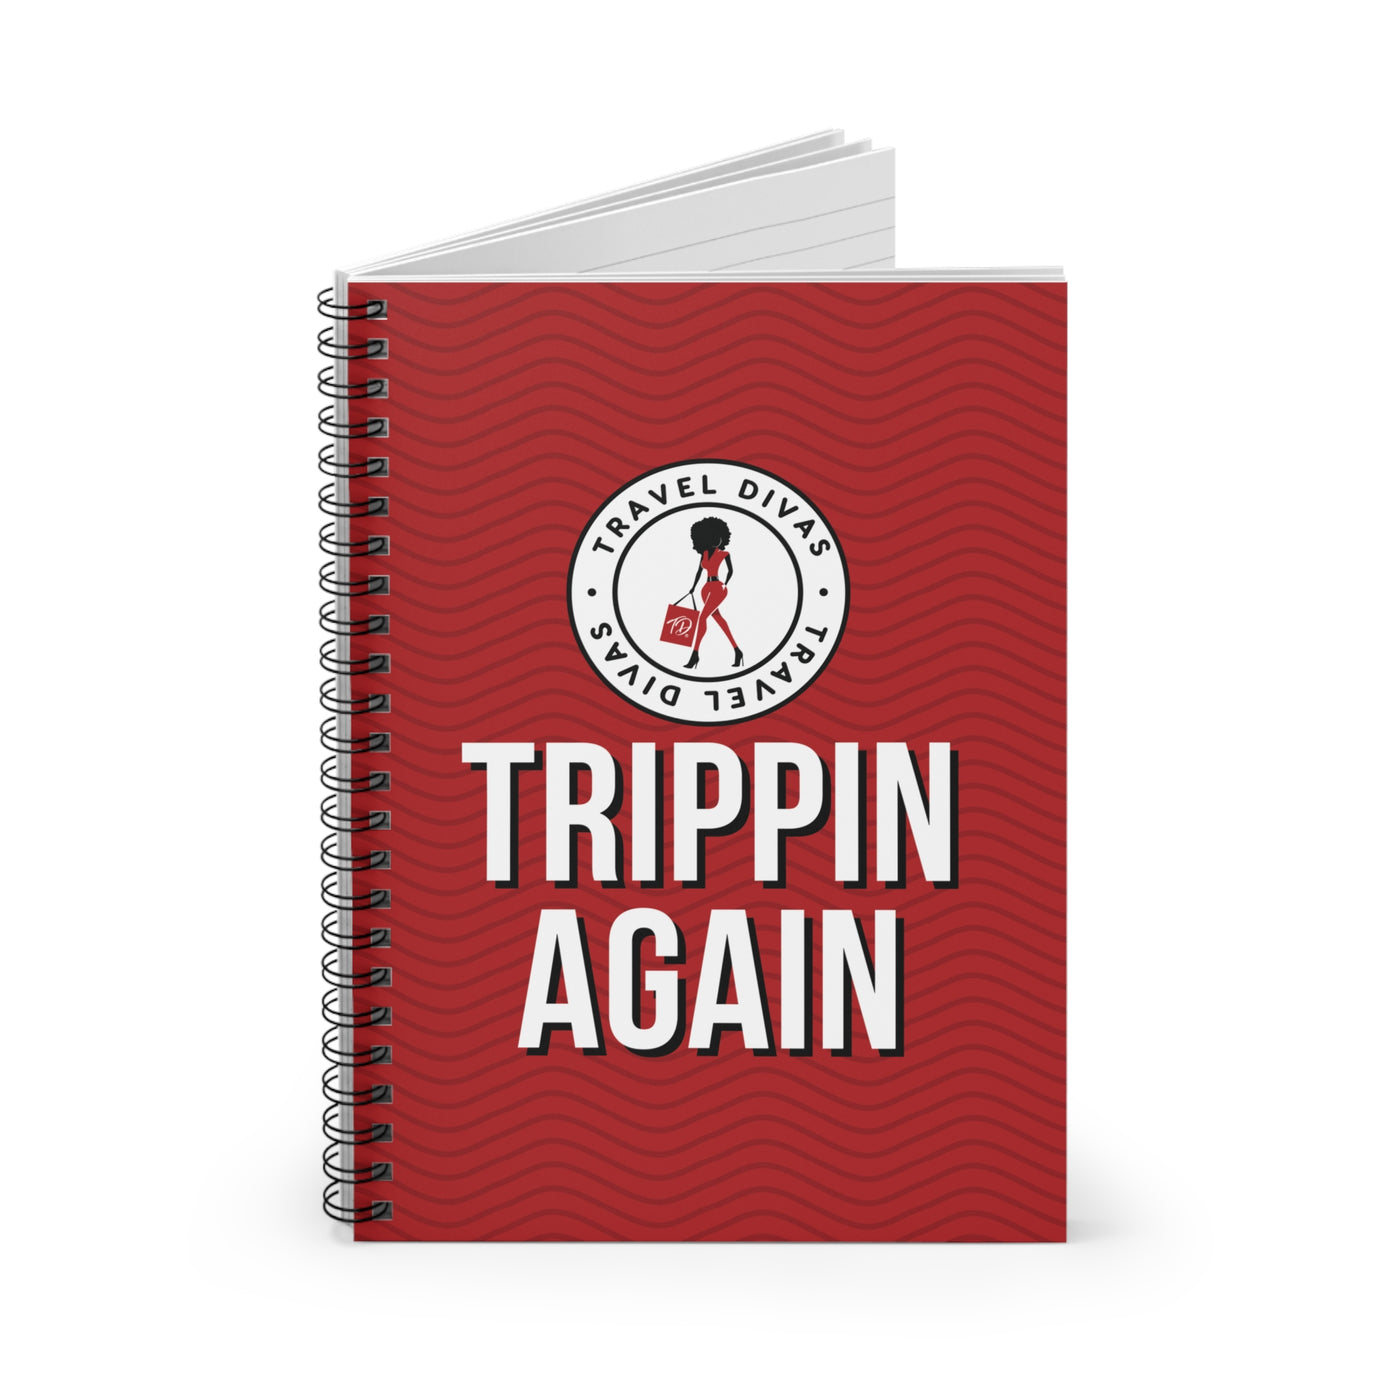 Trippin Again Spiral Notebook - Ruled Line